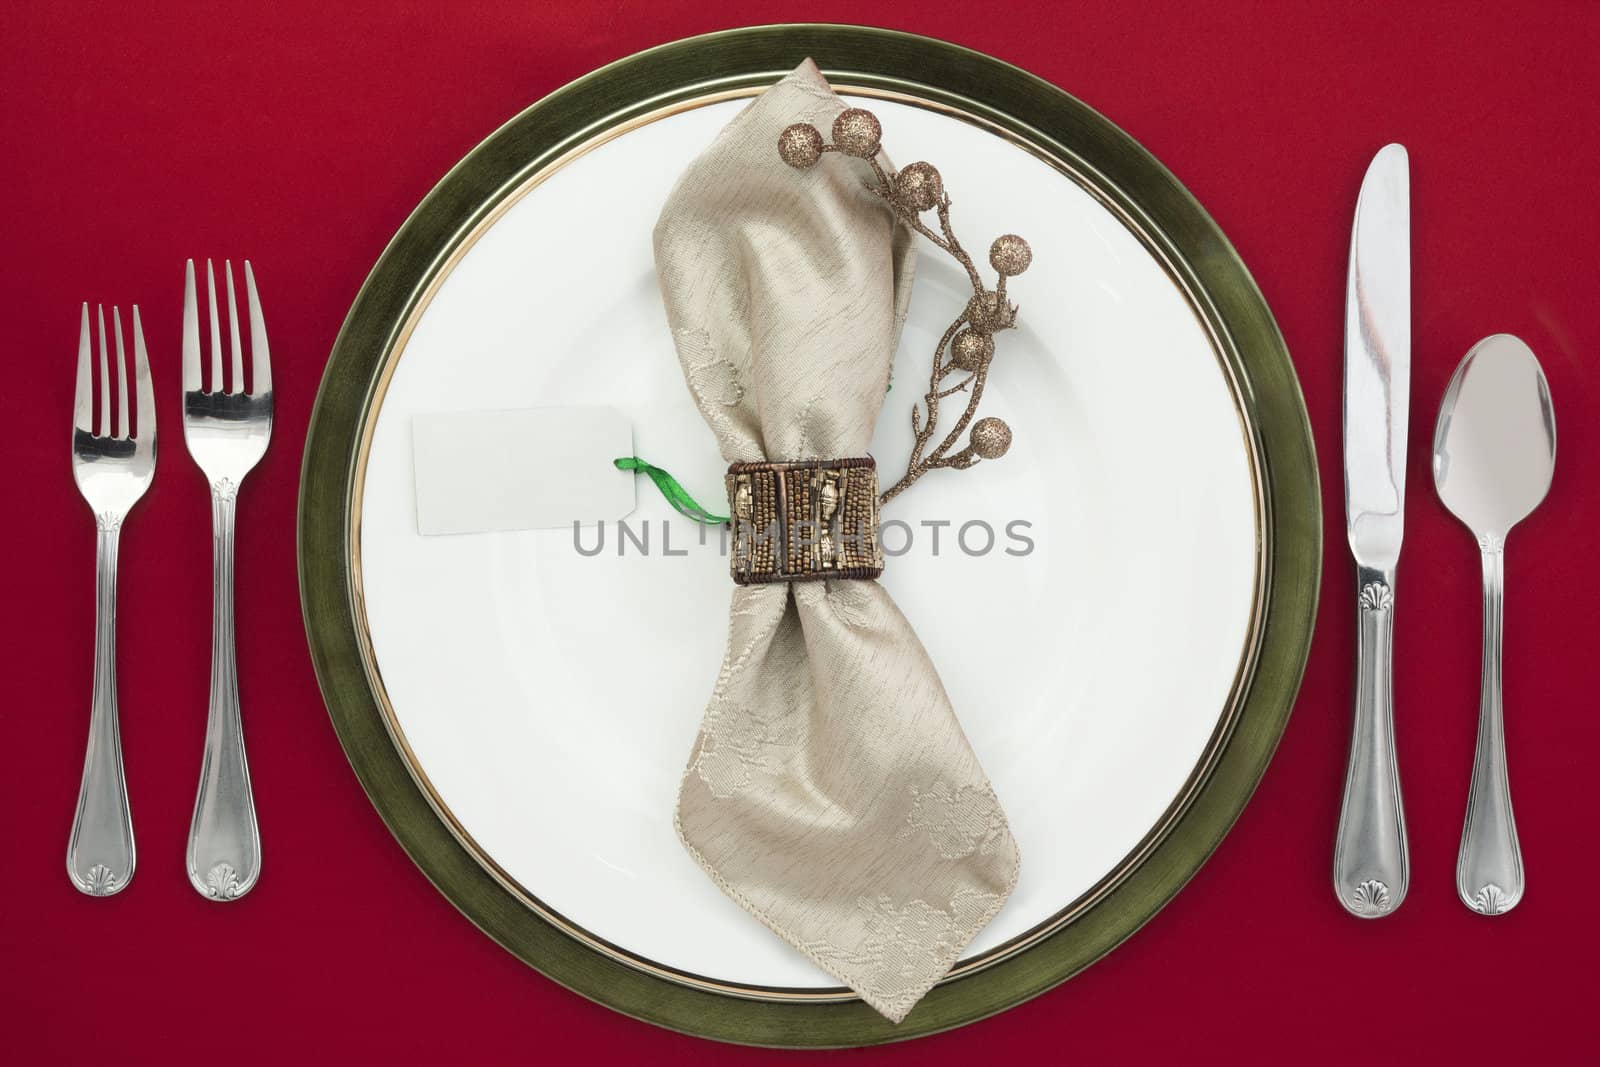 Overhead shot of plate and silverware on red table cloth, white napkin in plate with an empty card.